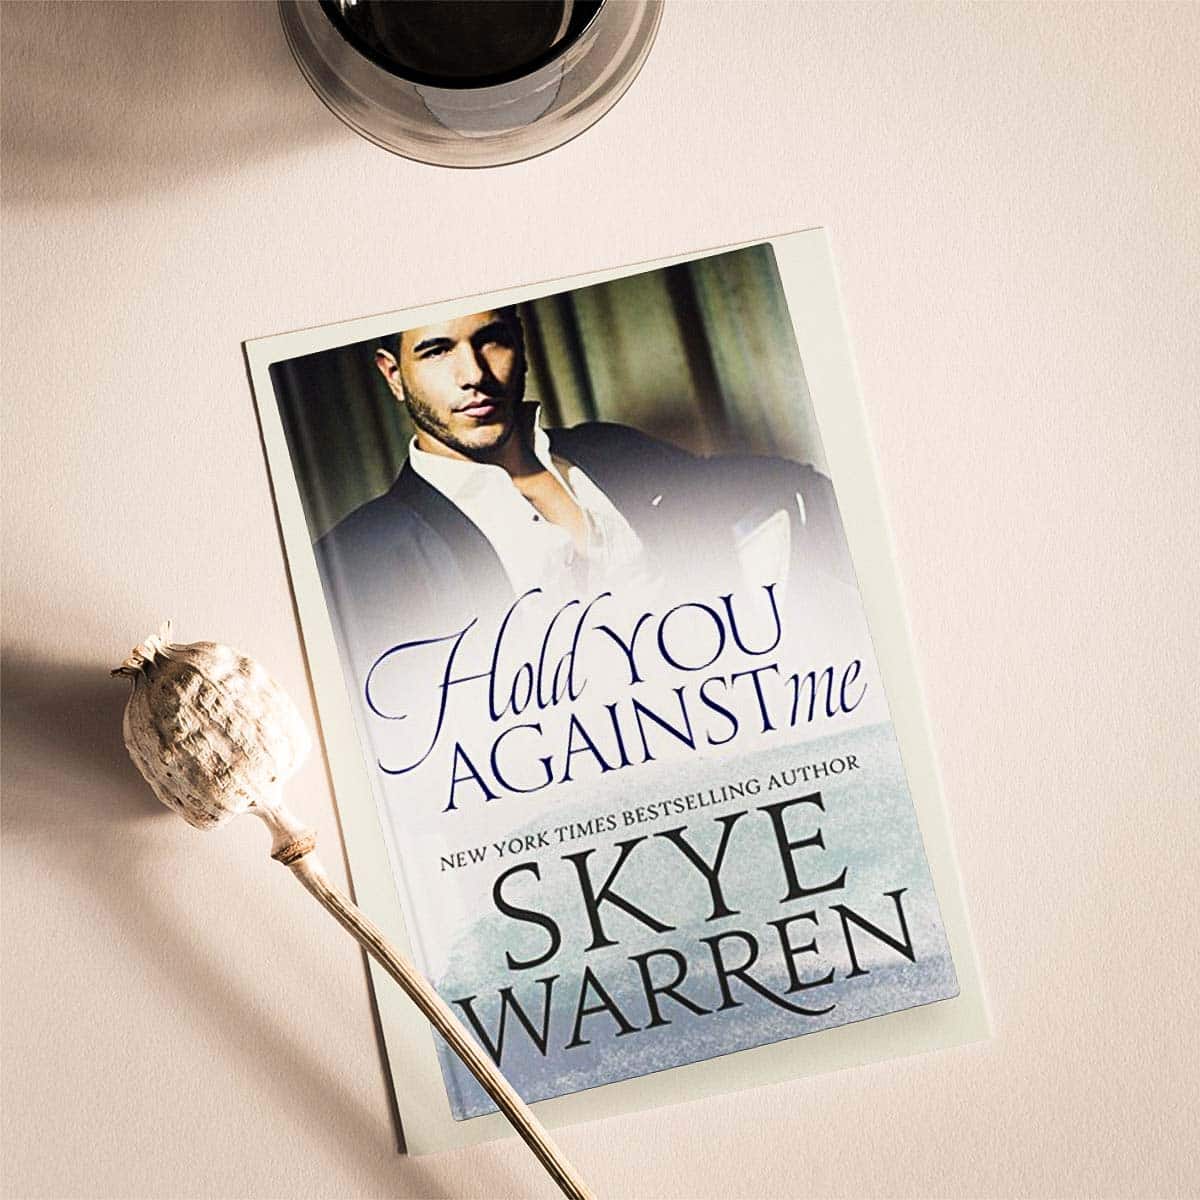 Hold You Against Me by Skye Warren is a gritty second-chance forbidden love story set in a mafia world that's a combination of sweet and romantic, edgy and rough